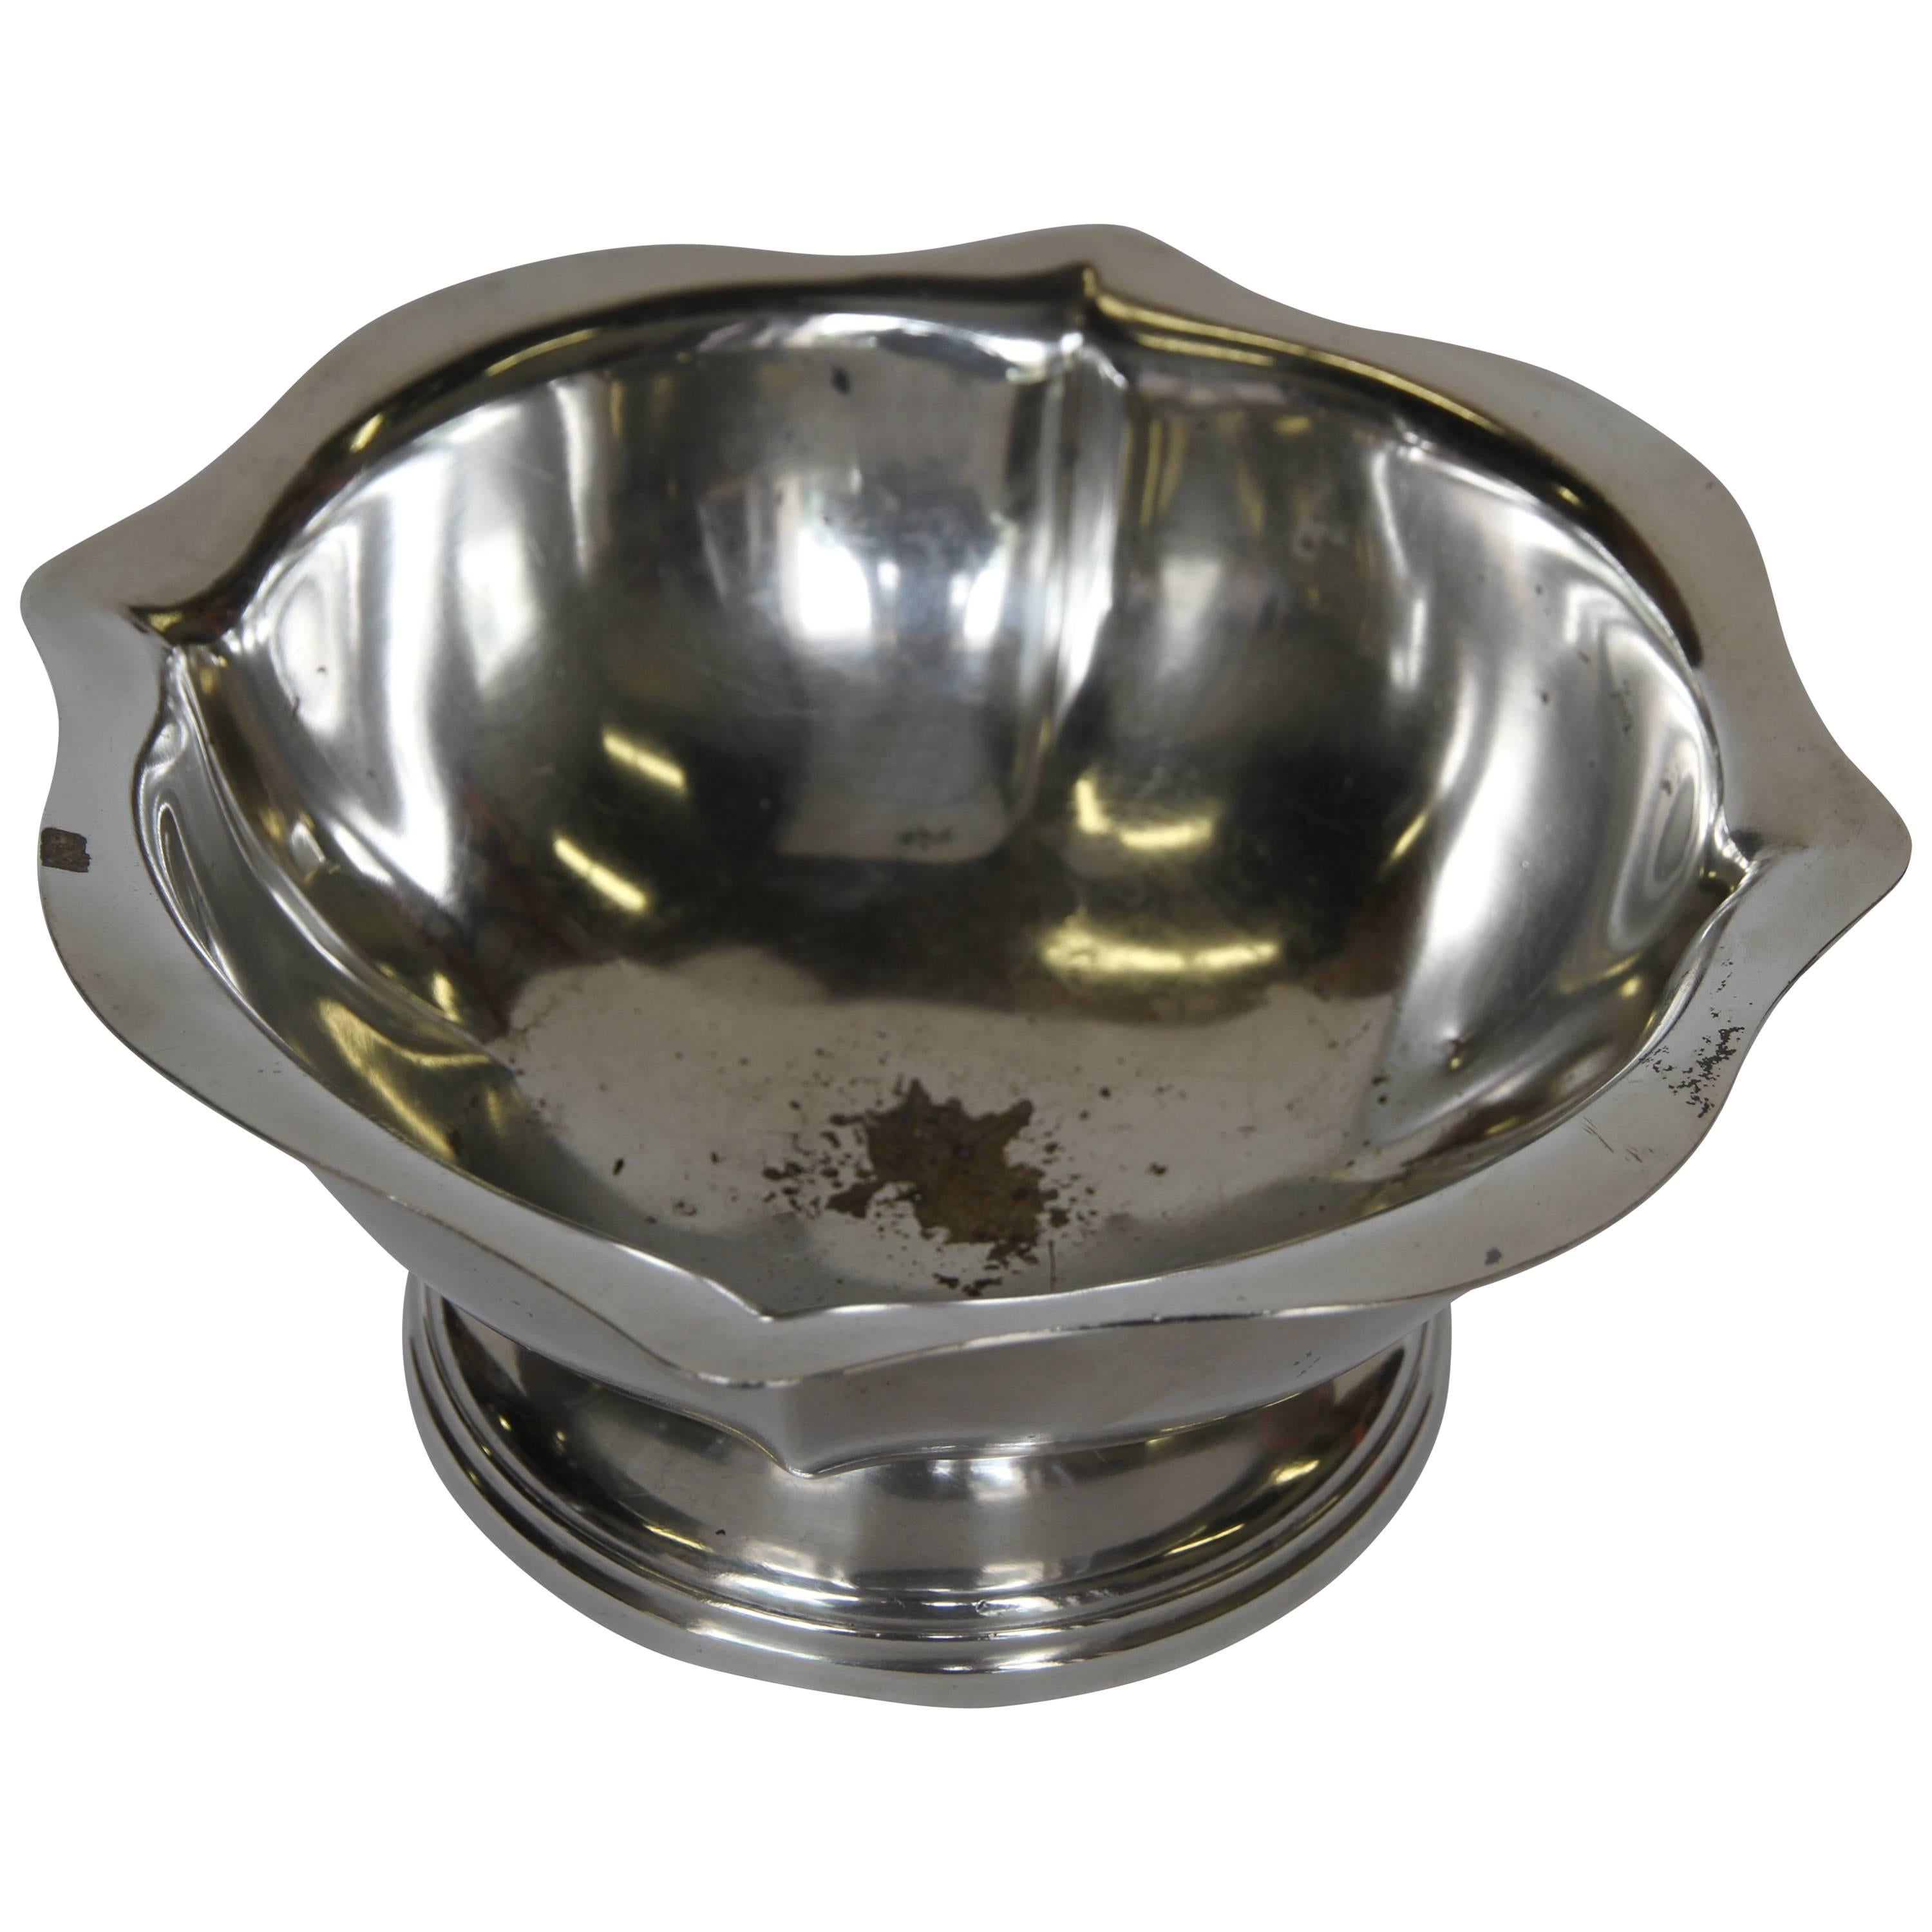 Hotel Silver United States Navy Serving Bowl